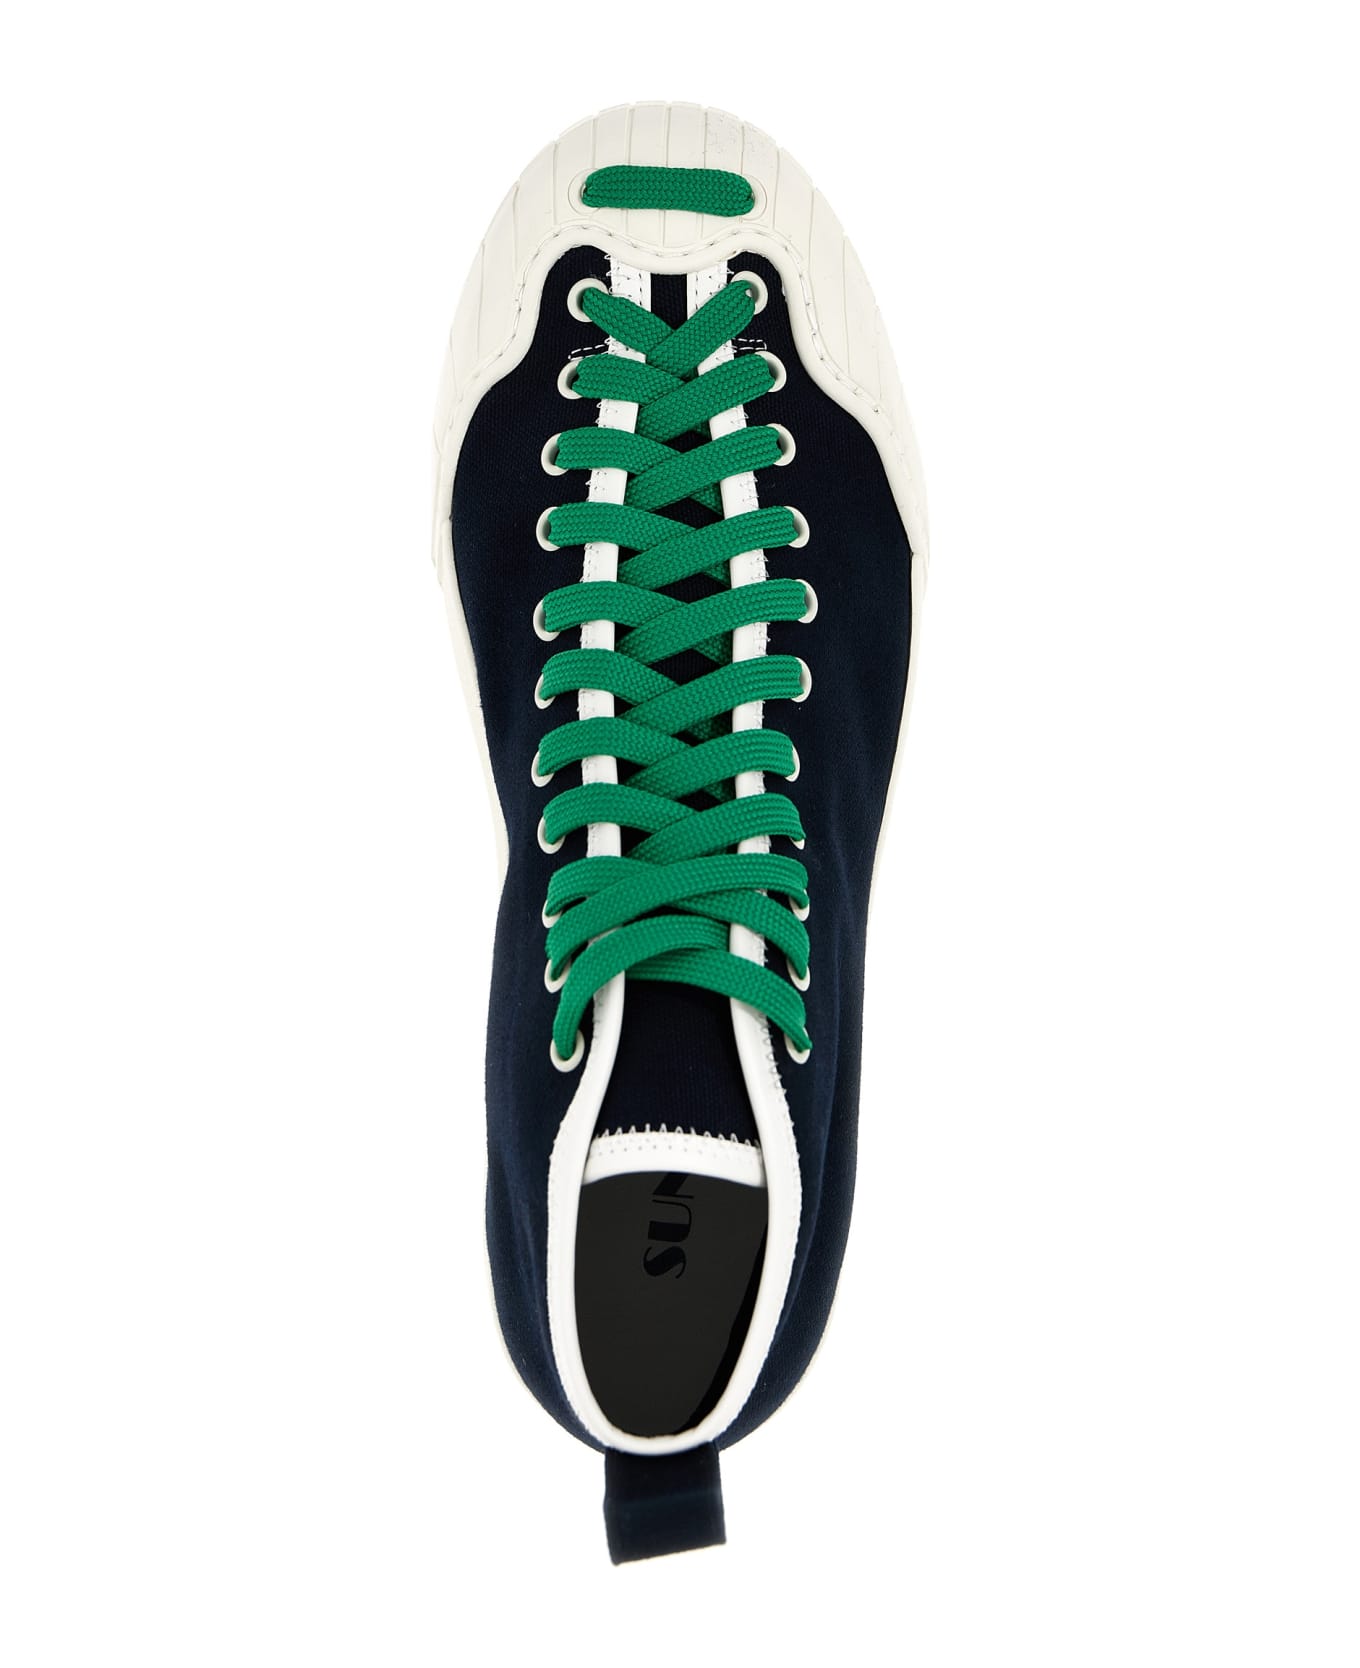 Sunnei 'isi' Sneakers - Blue